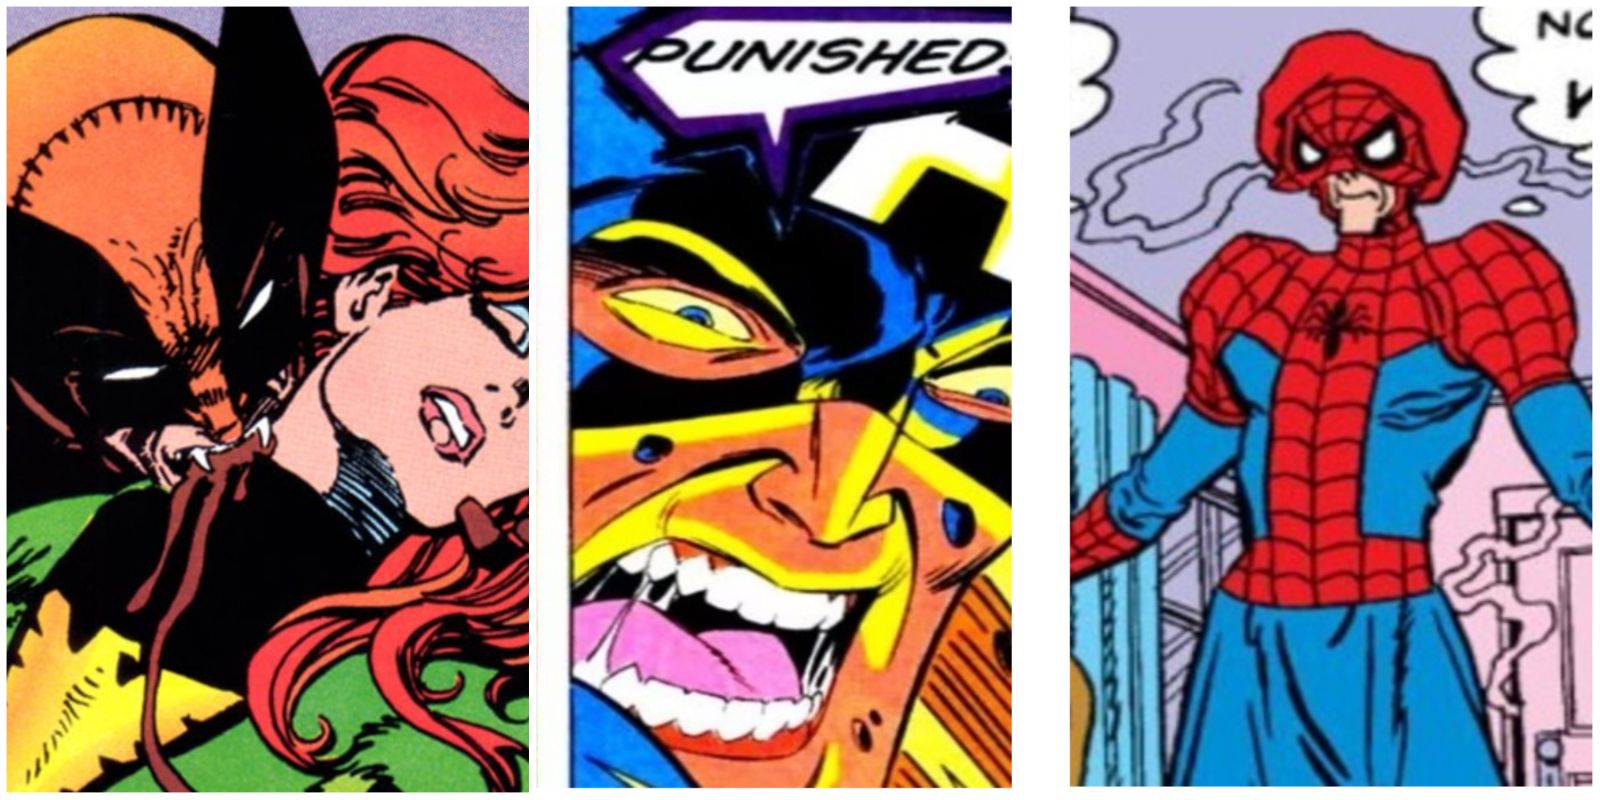 Wolverine becoming a vampire (left), the Punisher becoming Captain America (center) and Aunt May gaining spider-powers (right) are all examples of Marvel's What If going too far.